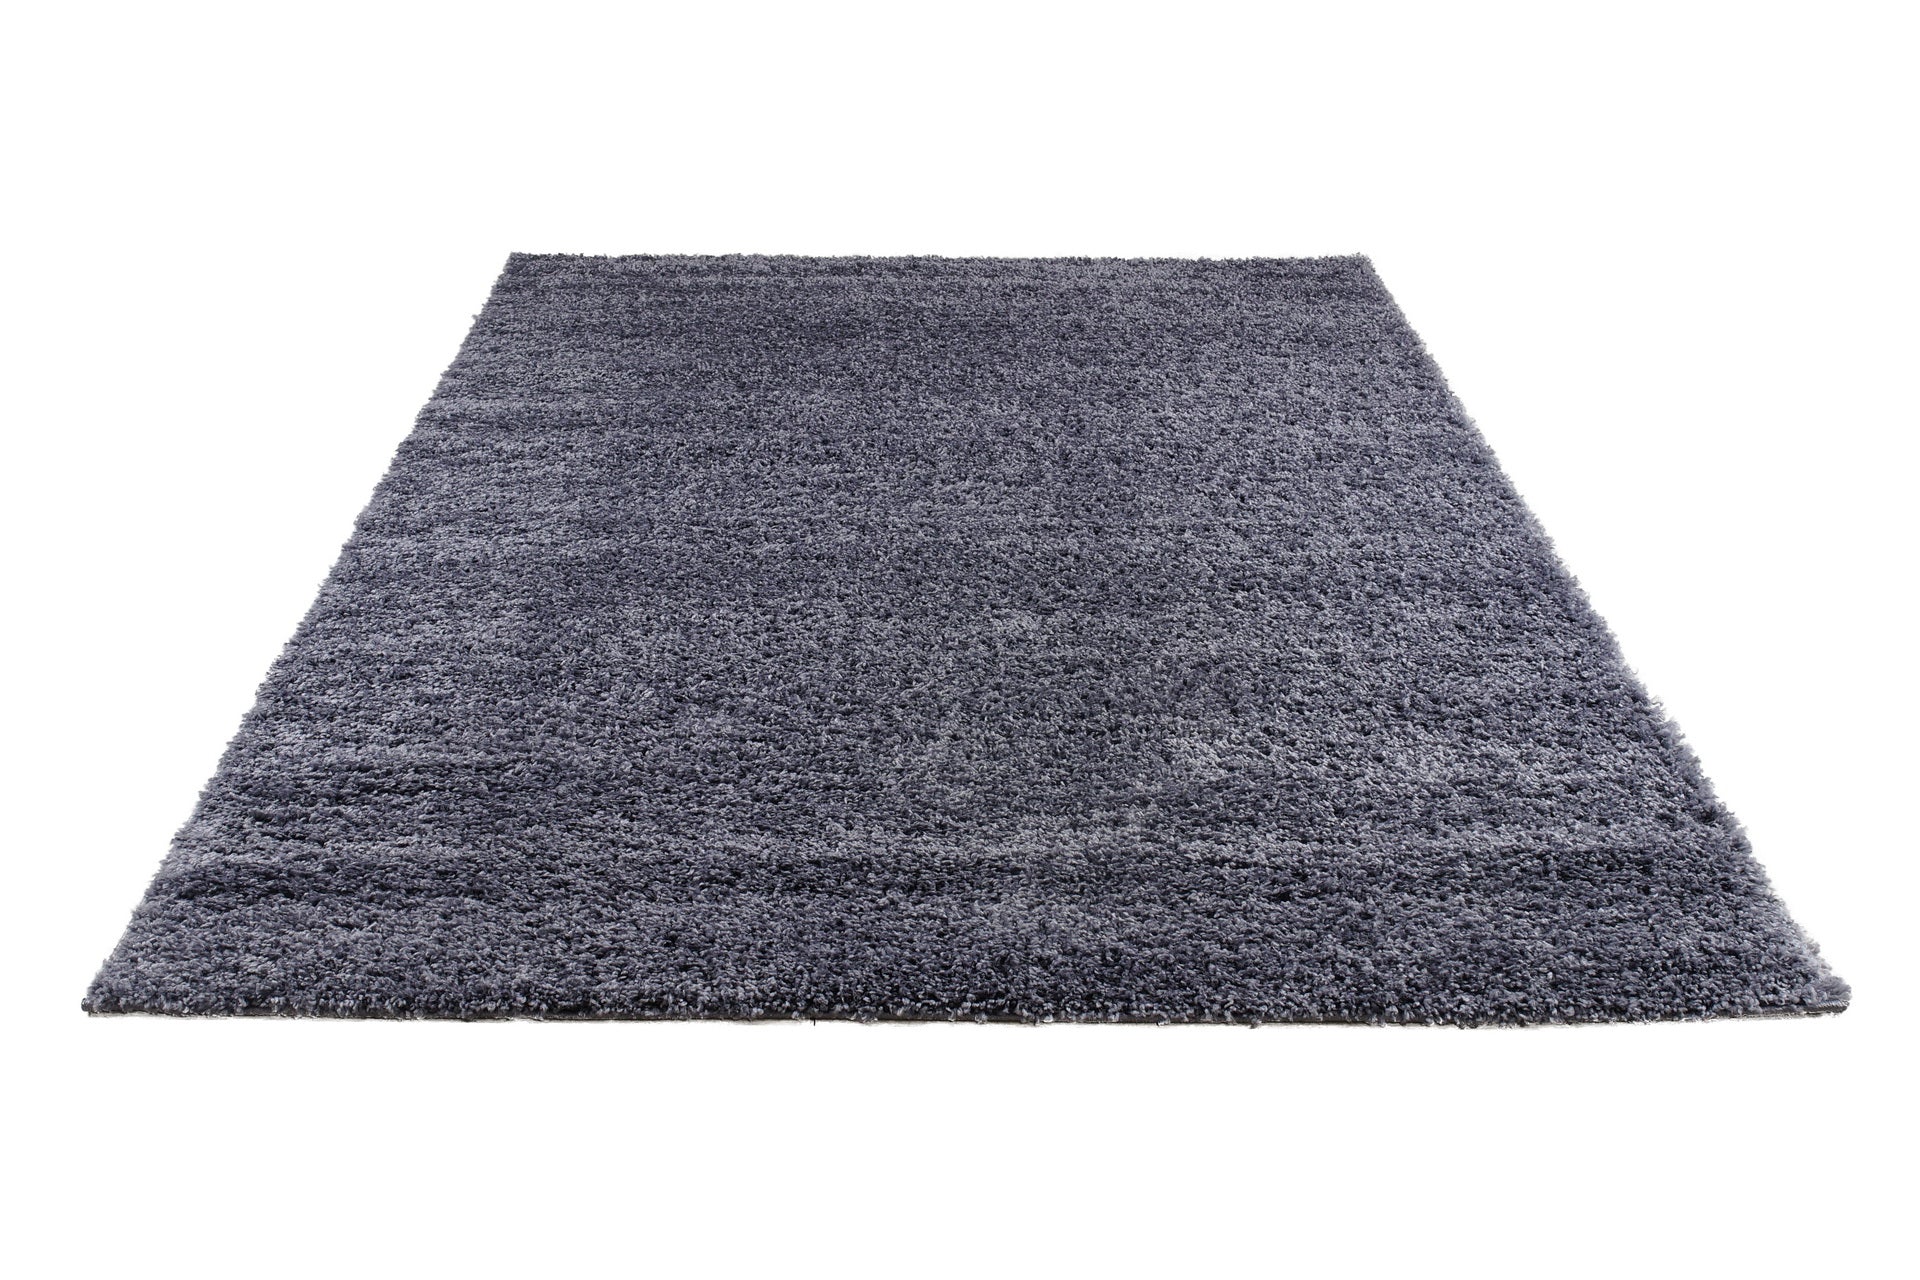 ladole rugs solid color shaggy meknes durable beautiful turkish indoor small mat doormat rug in gray 110 x 211 57cm x 90cm 2x8, 3x10, 2x10 ft Long Runner Rug, Hallway, Balcony, Entry Way, Kitchen, Stairs